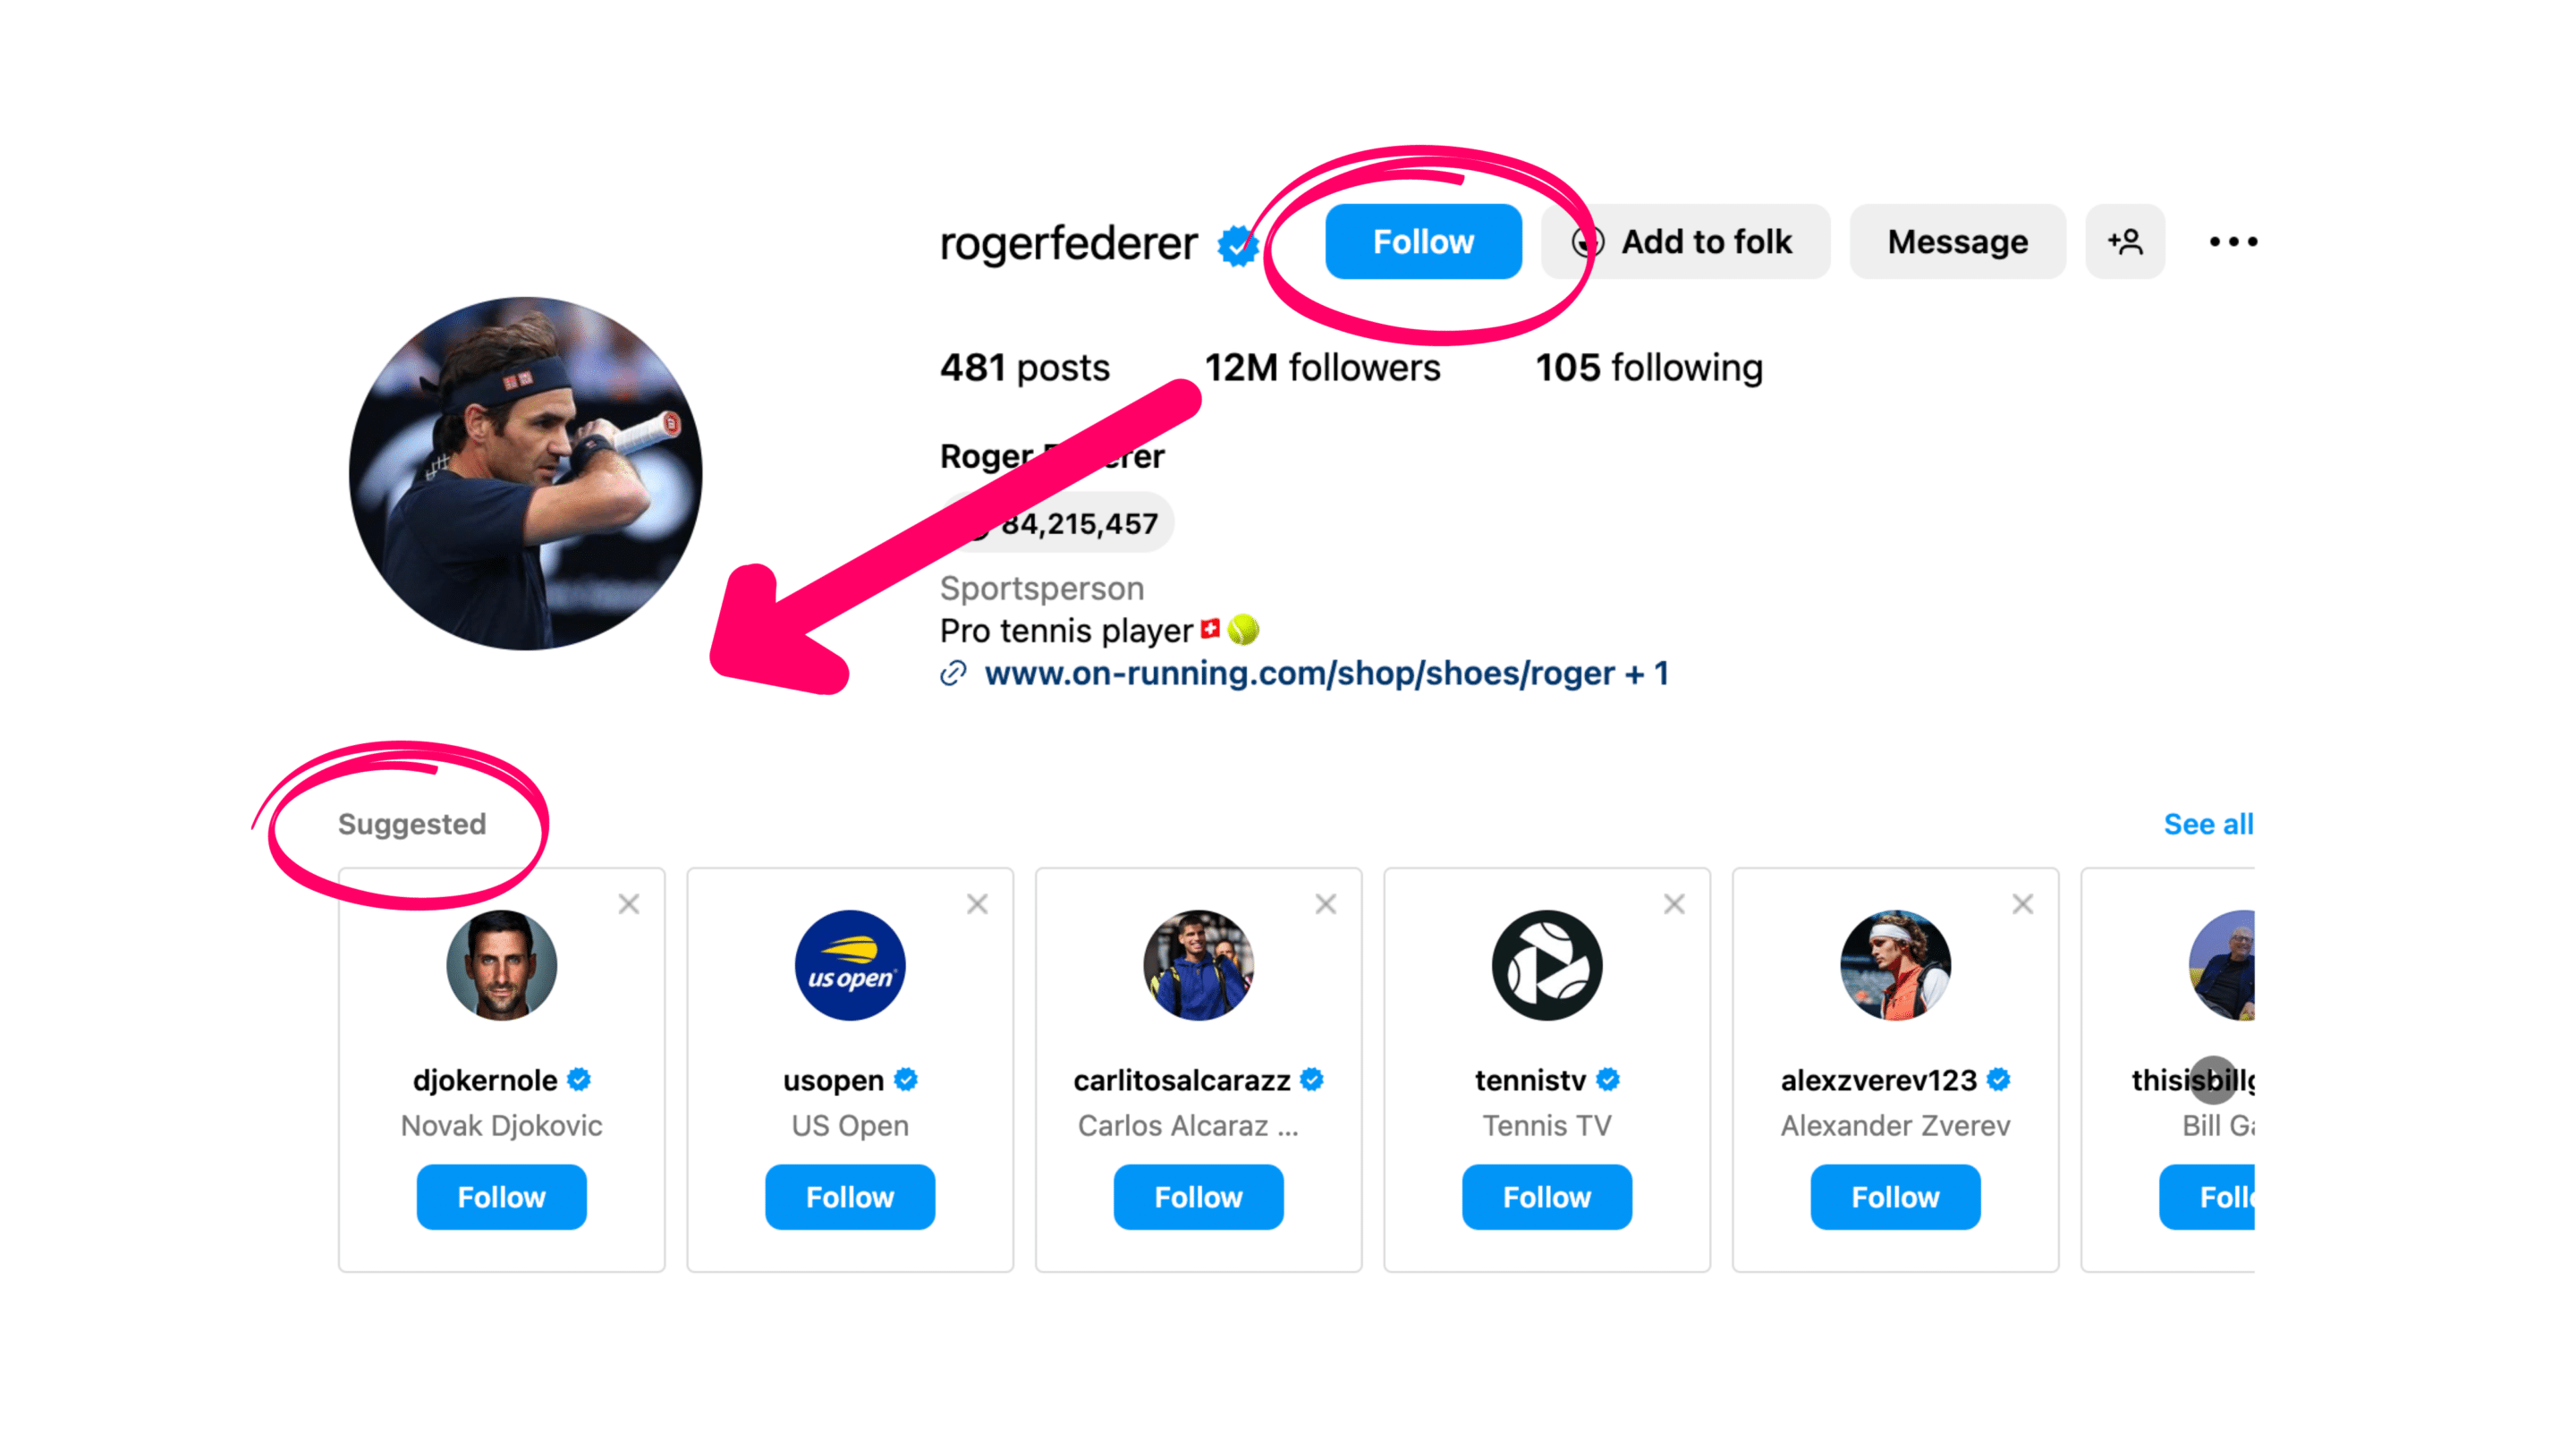 The instagram page of Roger Federer with an arrow pointing to suggested profiles.